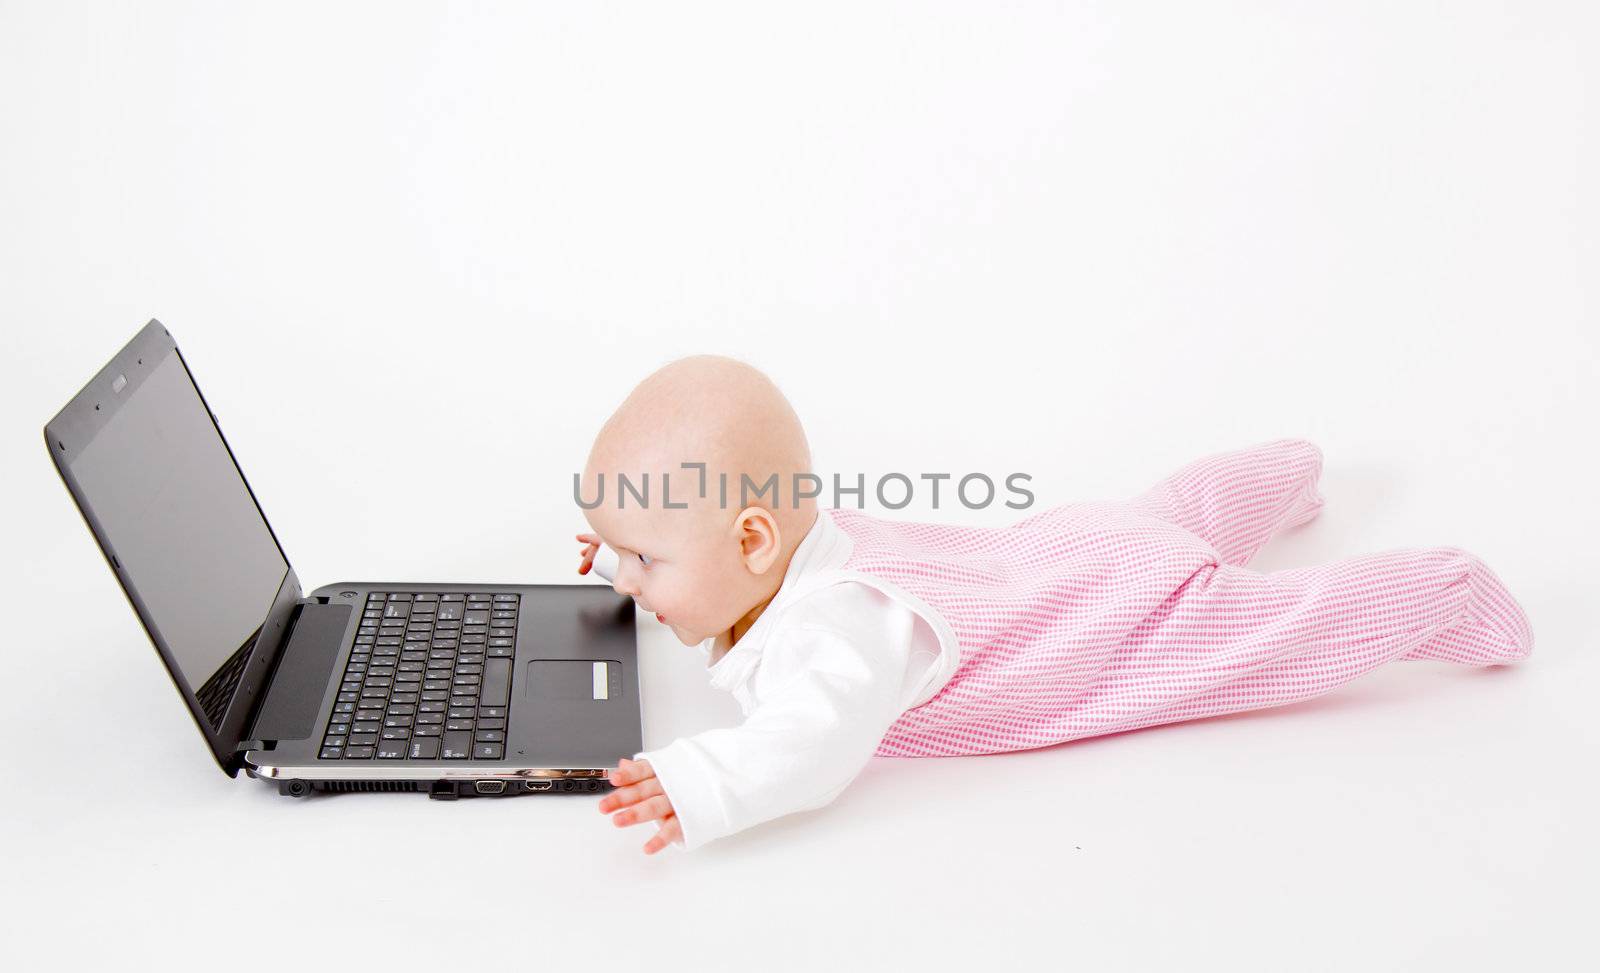 baby with laptop on a white background in studio
